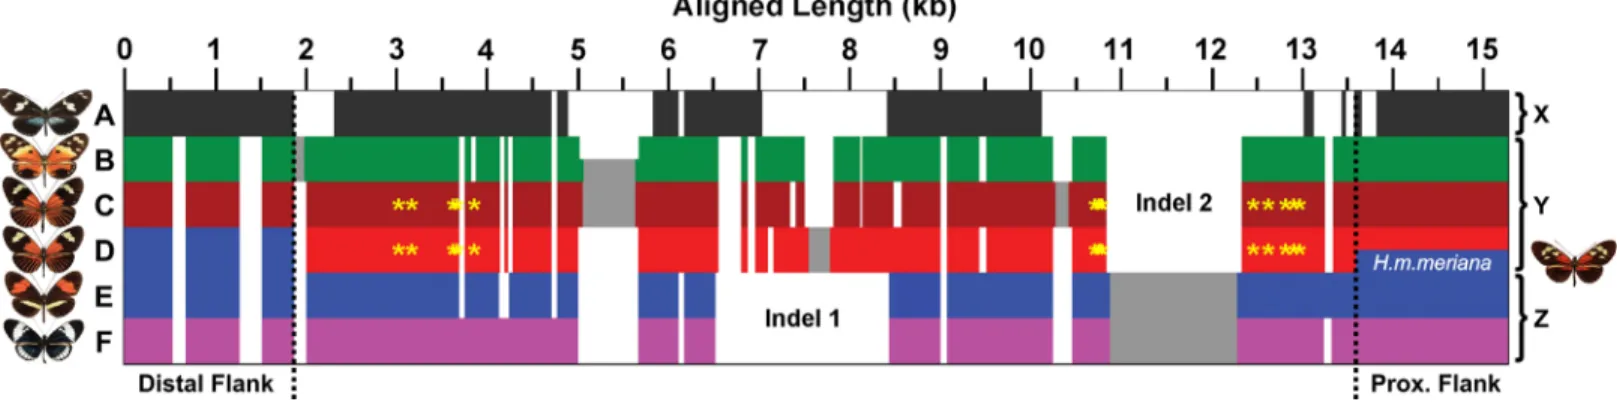 Fig 3. Schematic overview of the dennis region alignment architecture. Each group of alleles is characterised by a complex structure of insertion and deletion variation